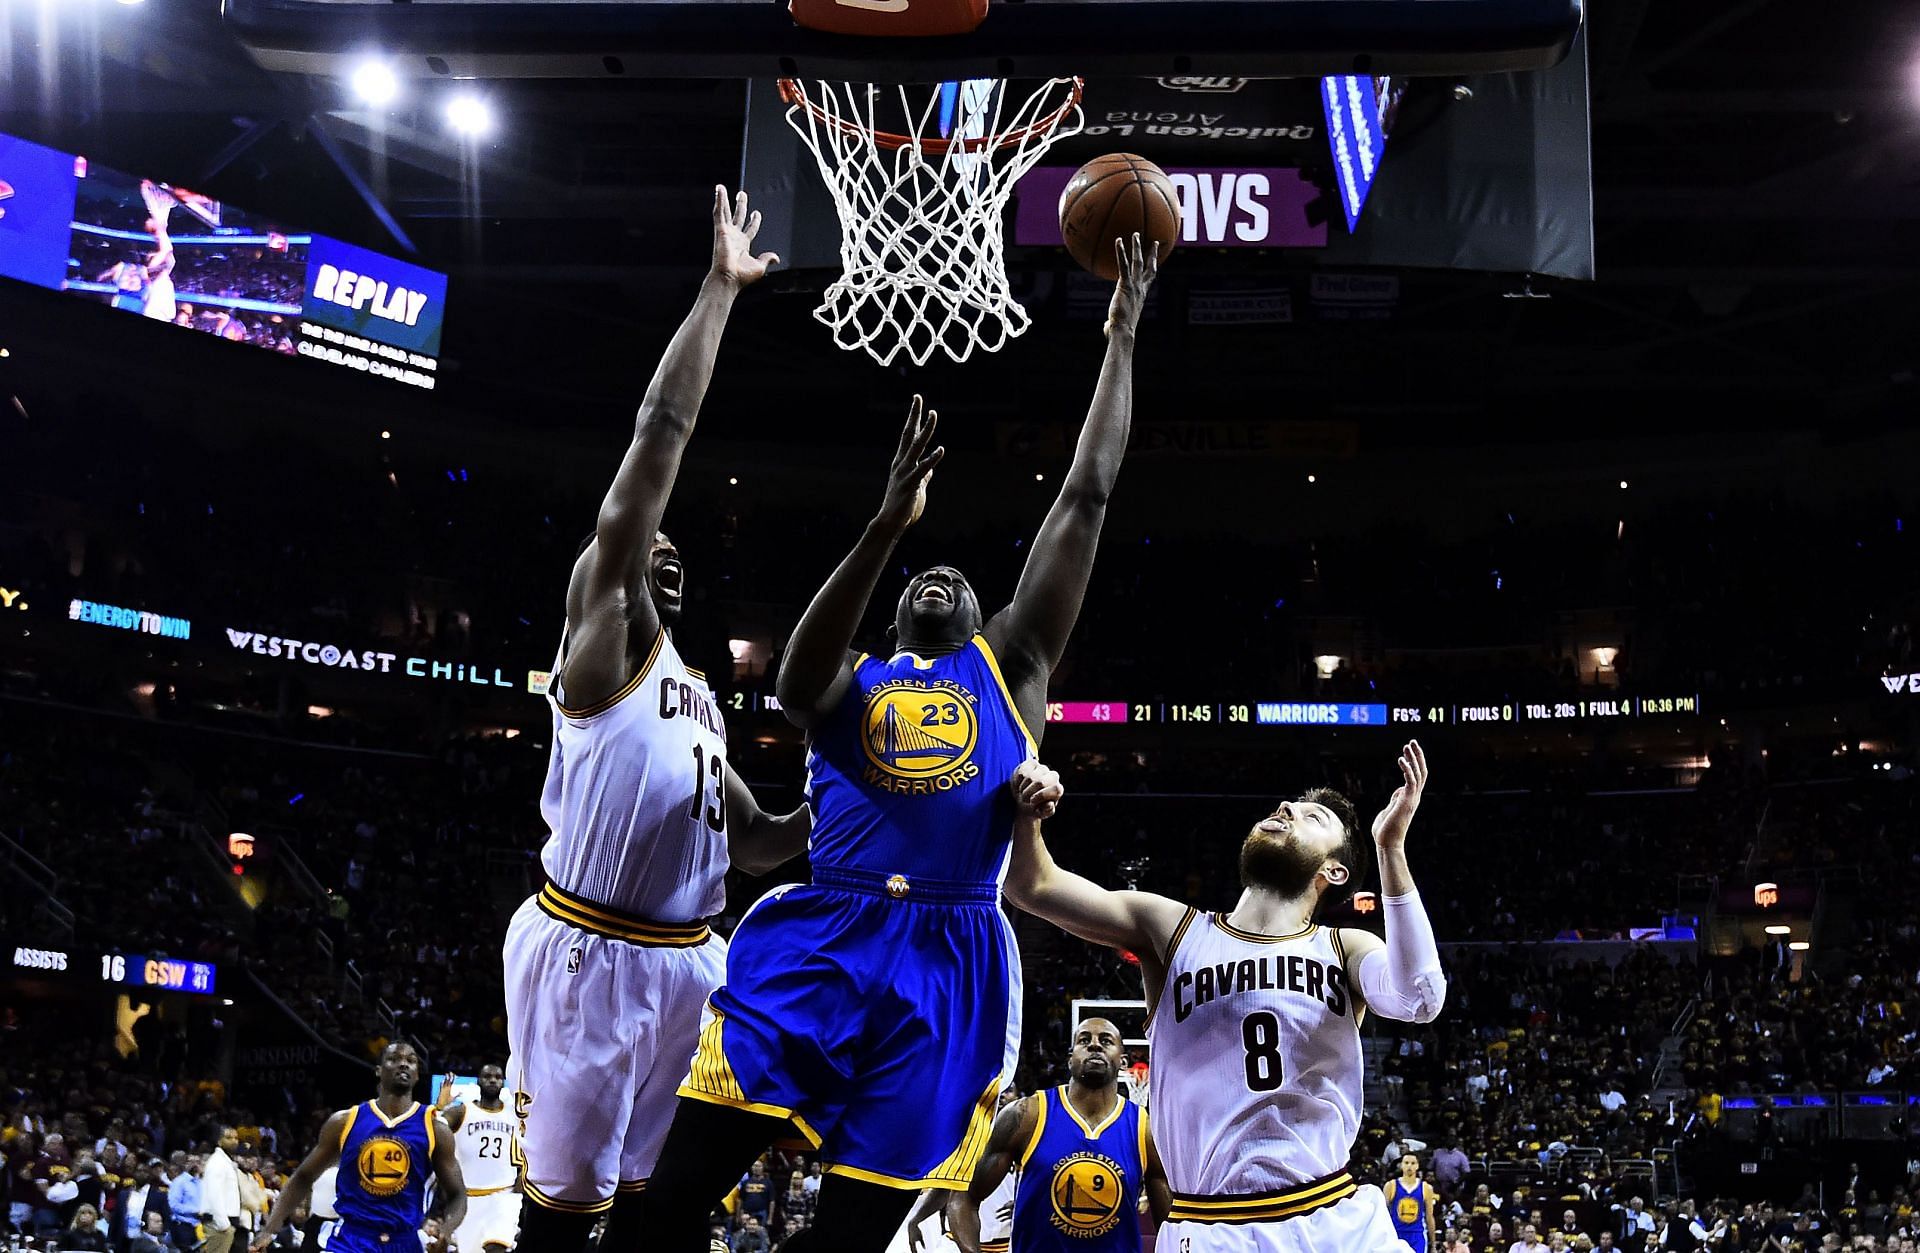 Draymond Green against the Cleveland Cavaliers